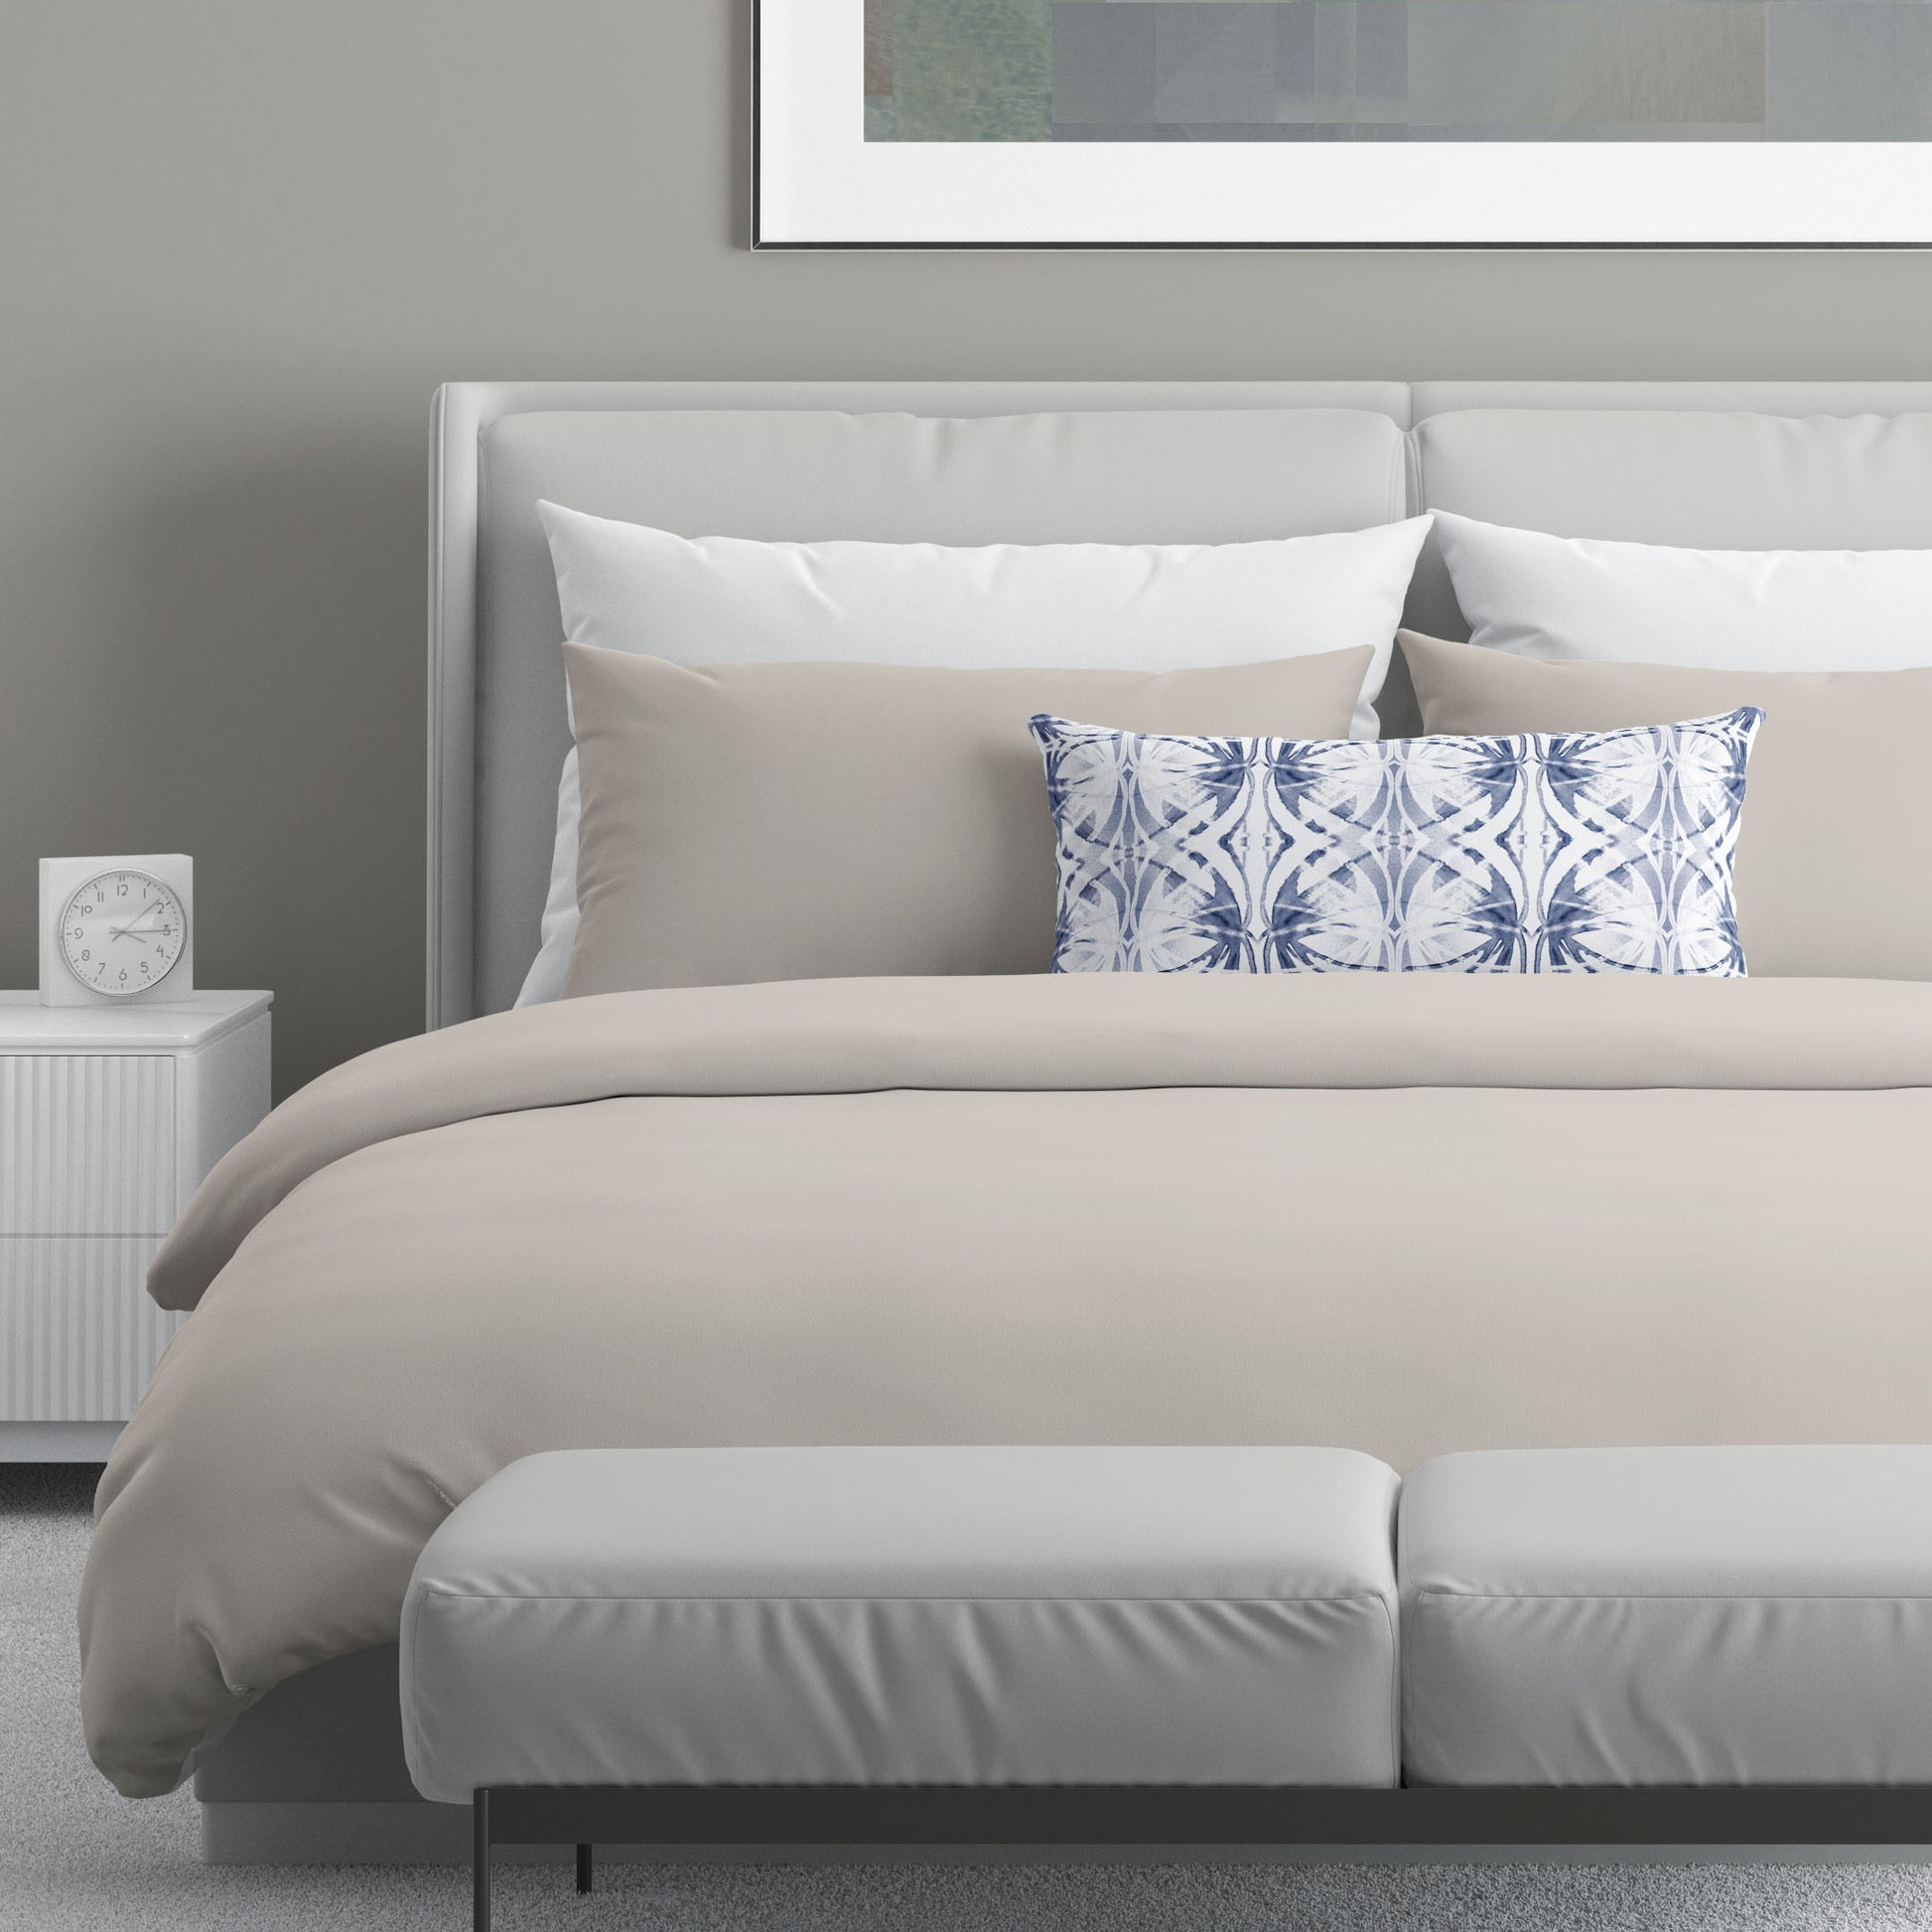 Neutral colored bedroom featuring a bed with a blue and white abstract patterned lumbar pillow.